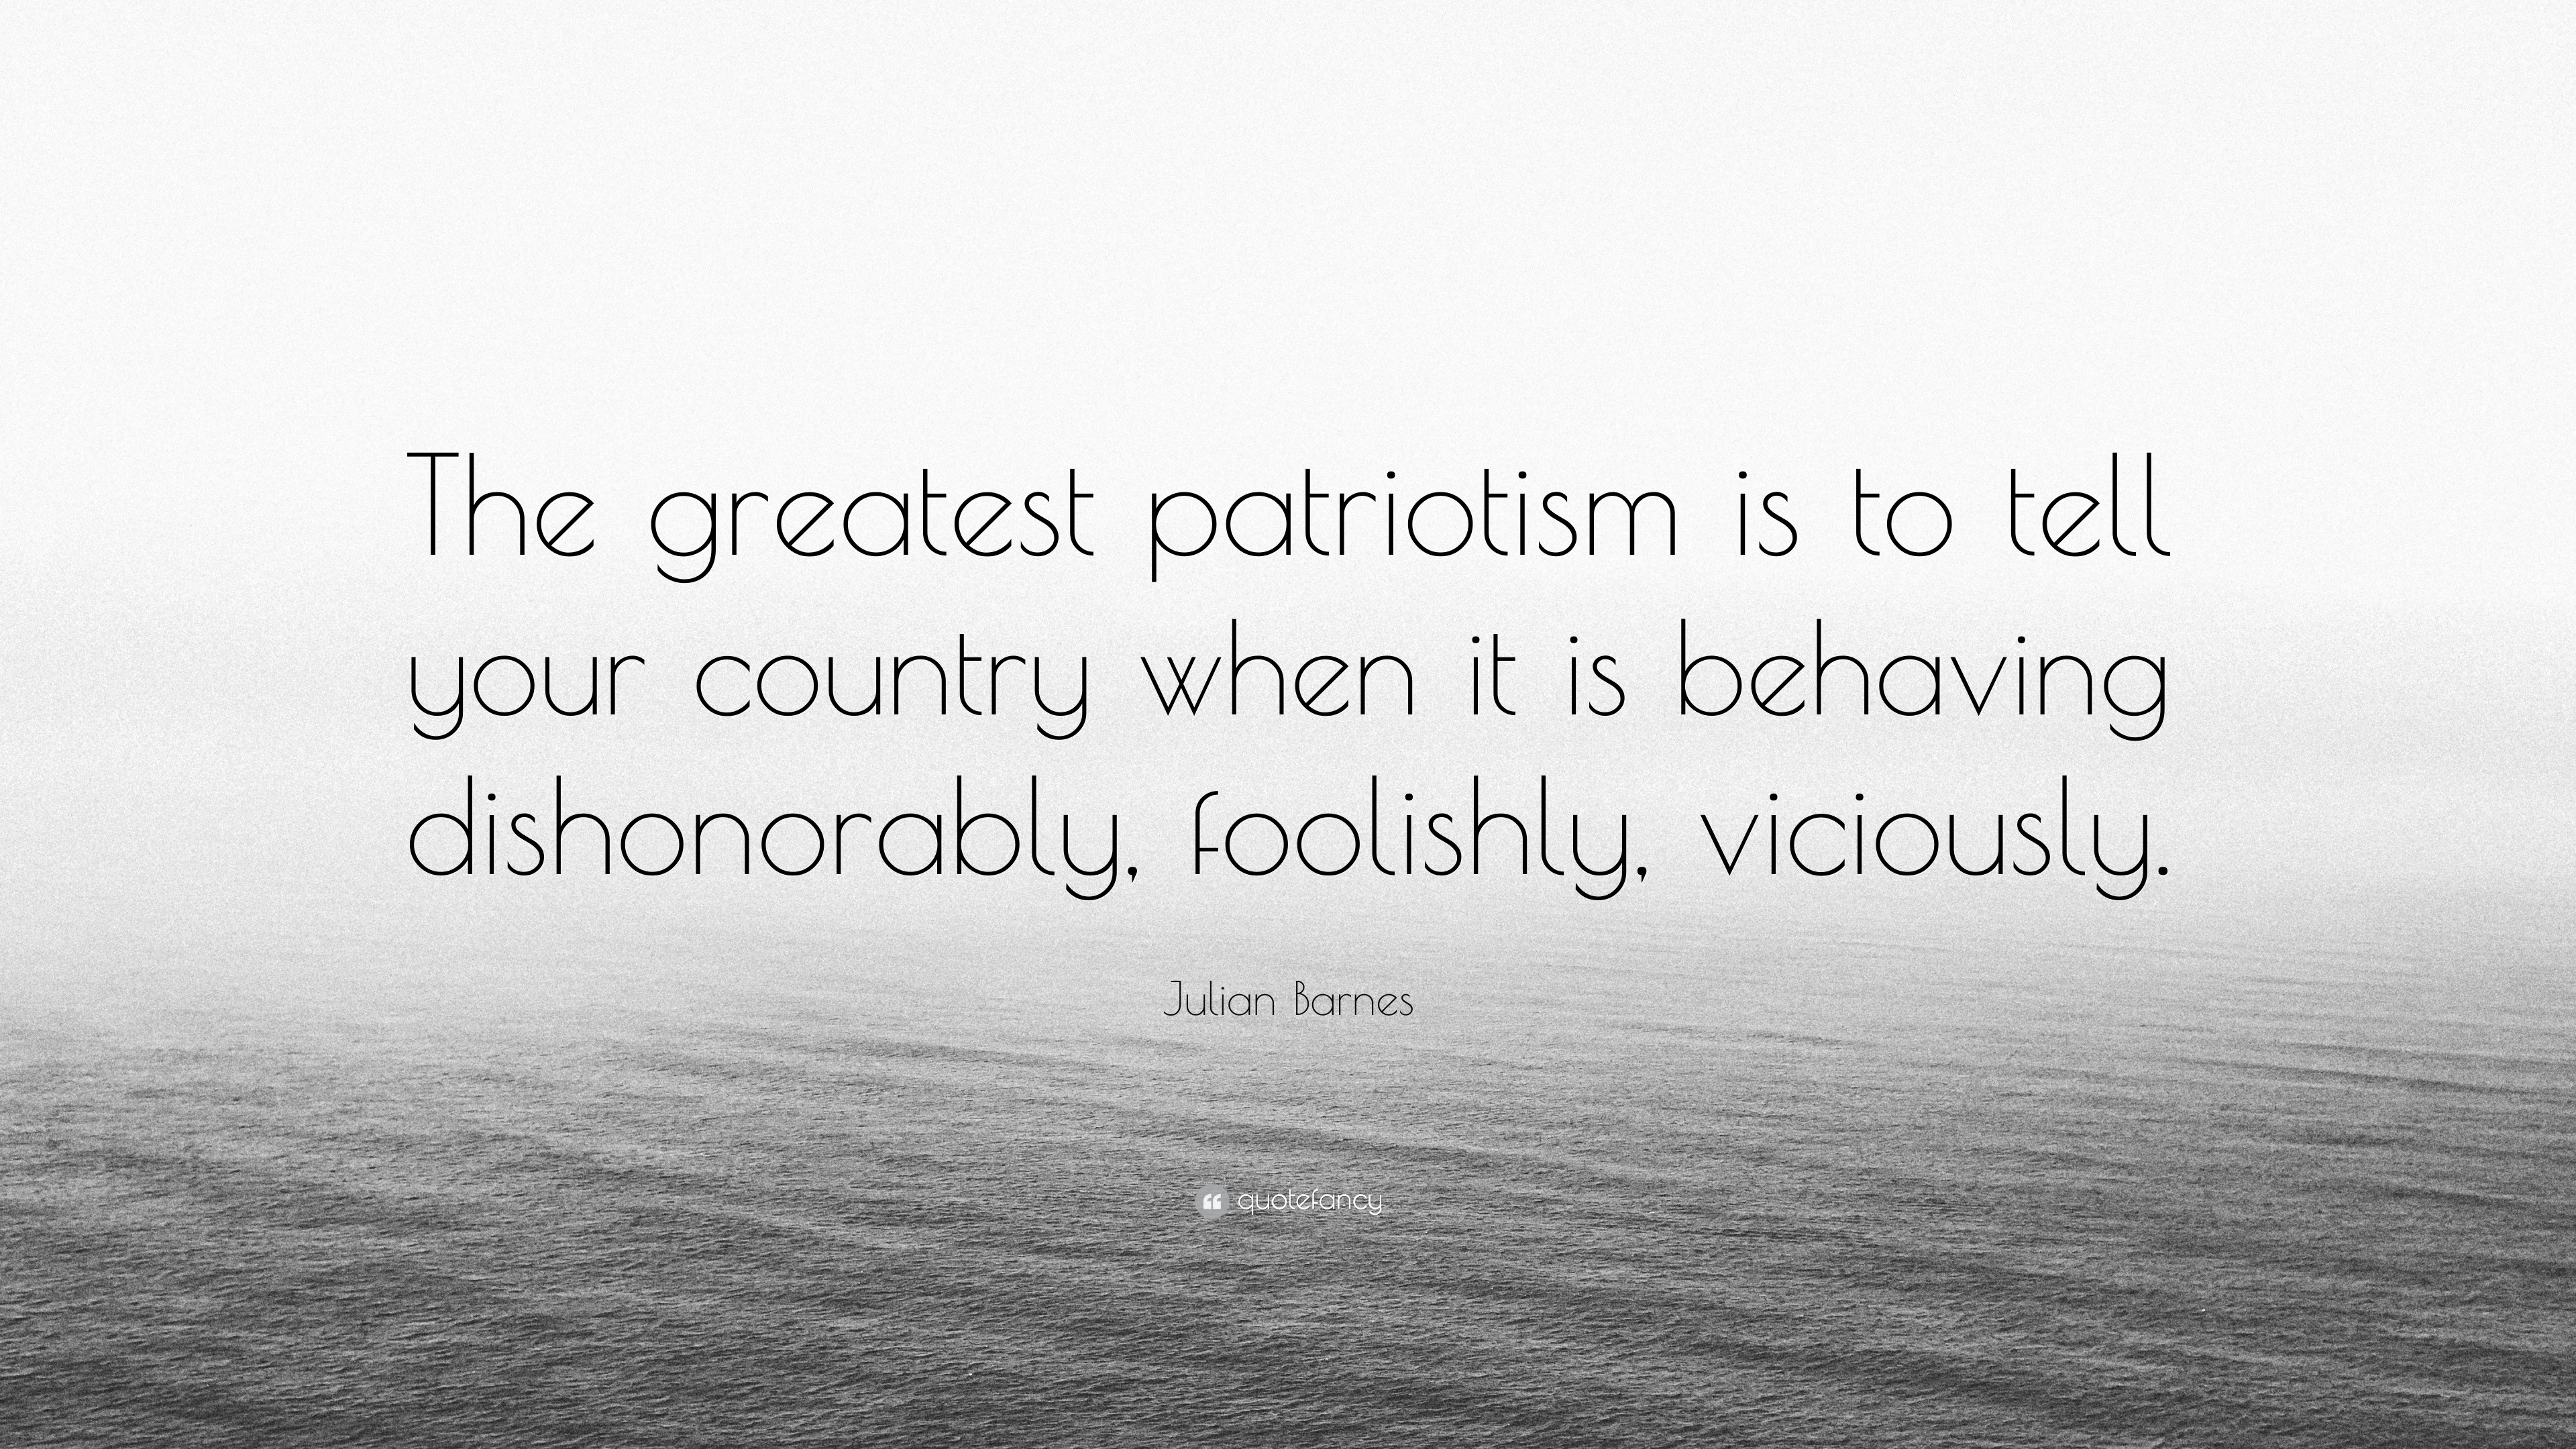 Julian Barnes Quote The Greatest Patriotism Is To Tell Your Country When It Is Behaving Dishonorably